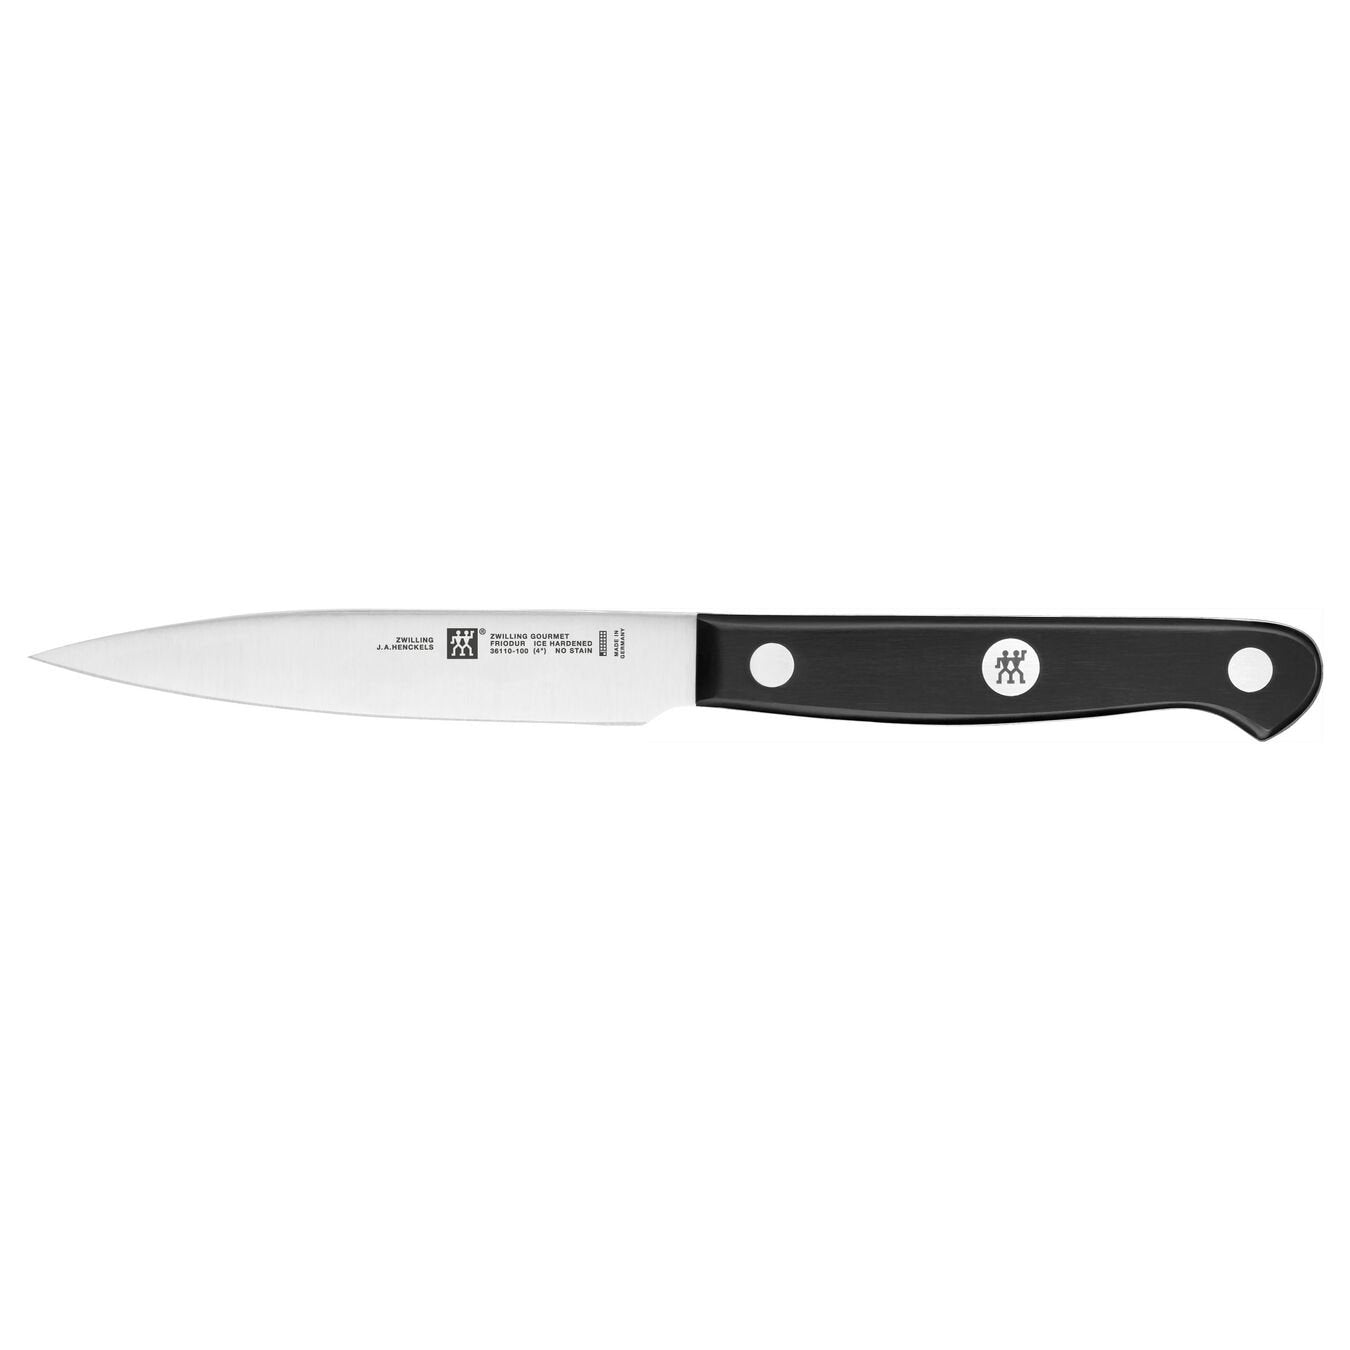 short bladed knife with riveted black handle in white background